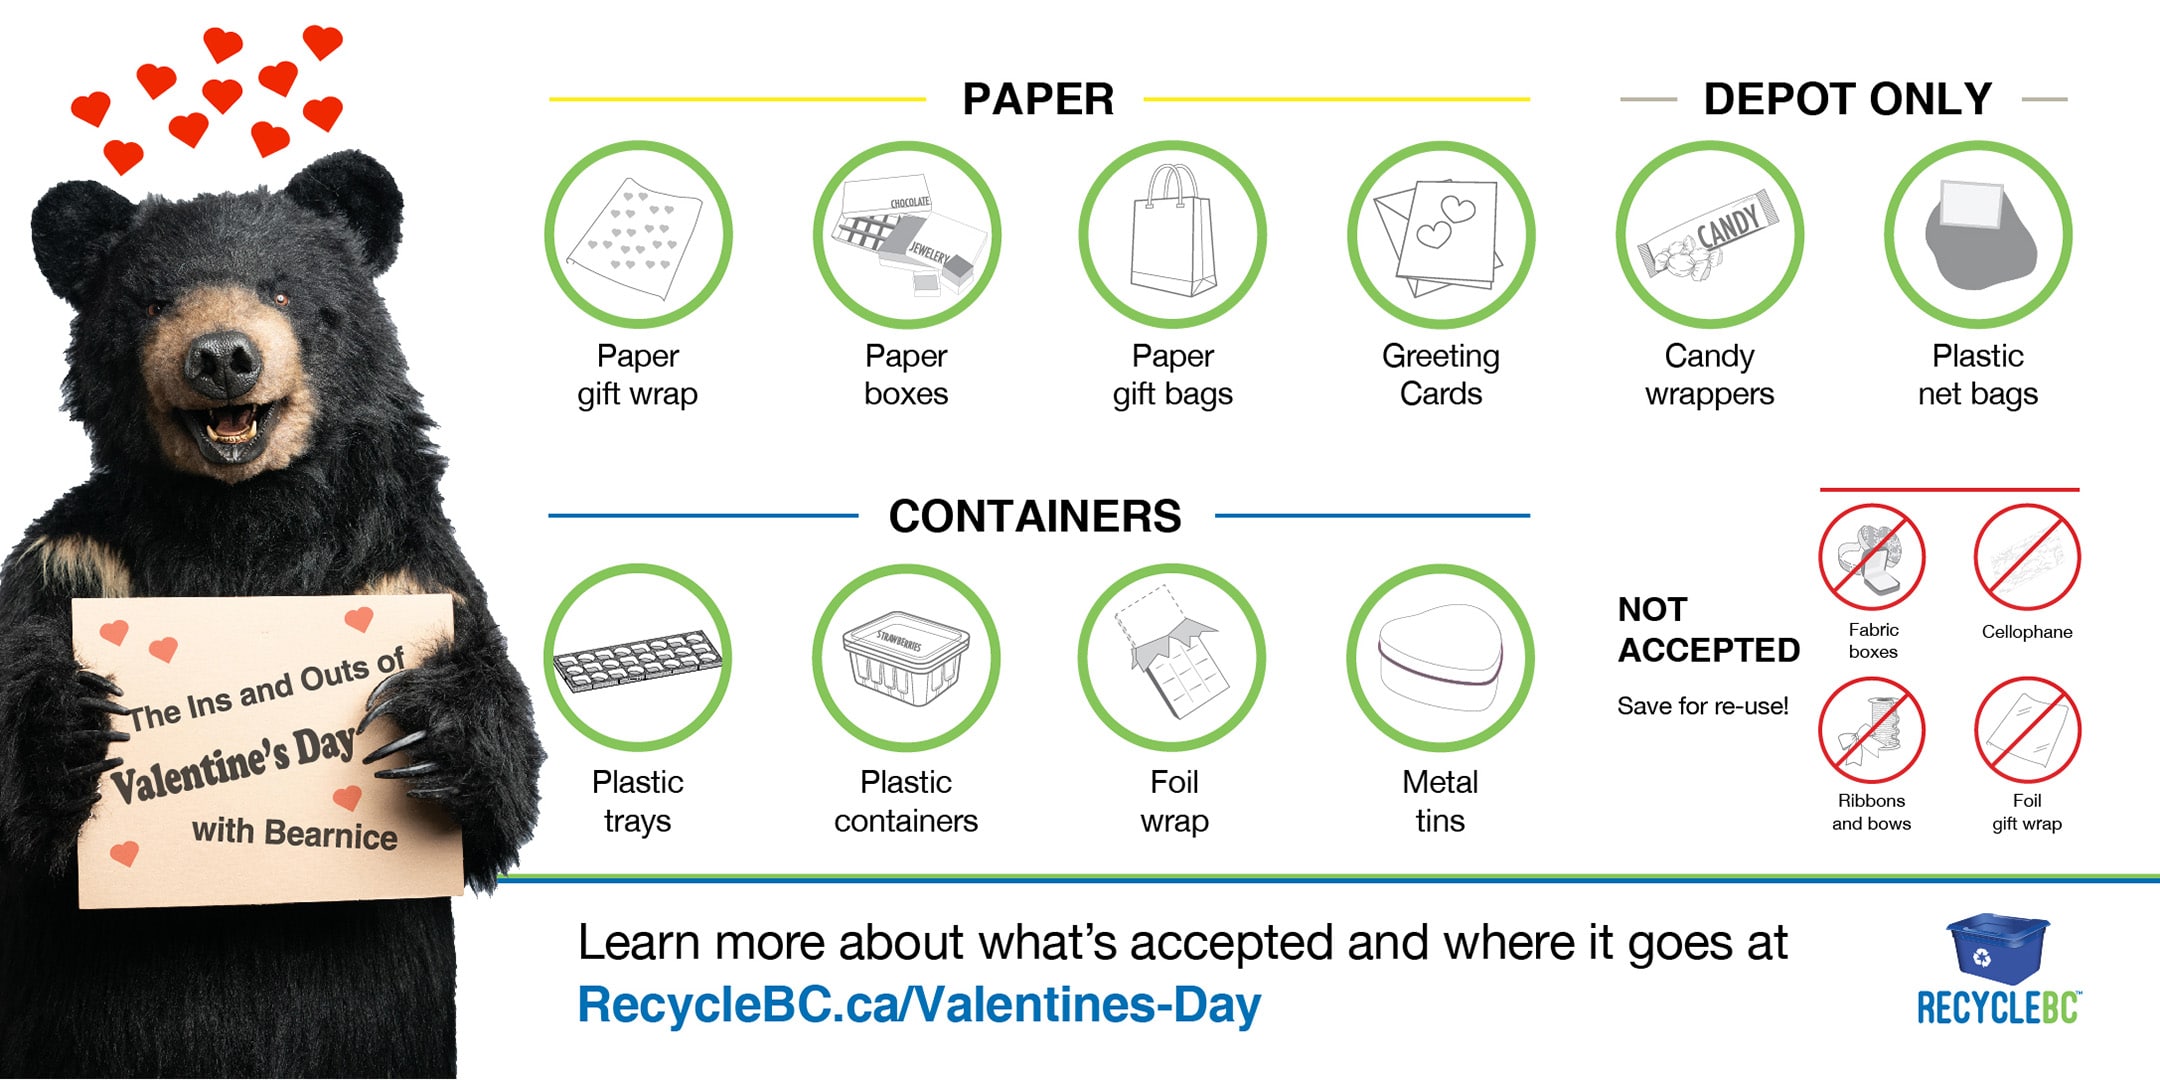 Info graphic showing packaging and paper accepted by Recycle BC that are commonly associated with Valentine's Day